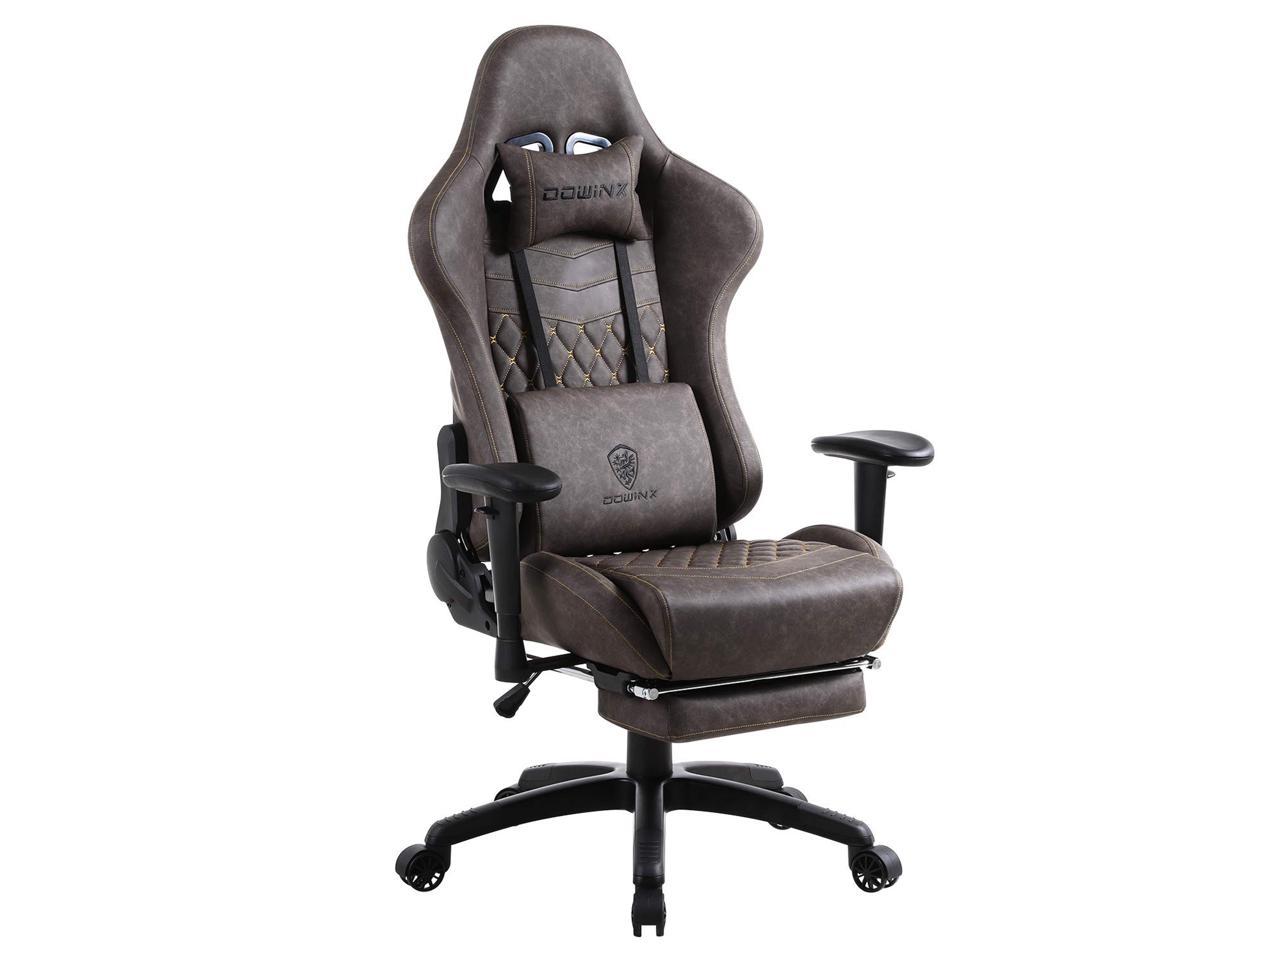  Dowinx Gaming Chair Price for Living room